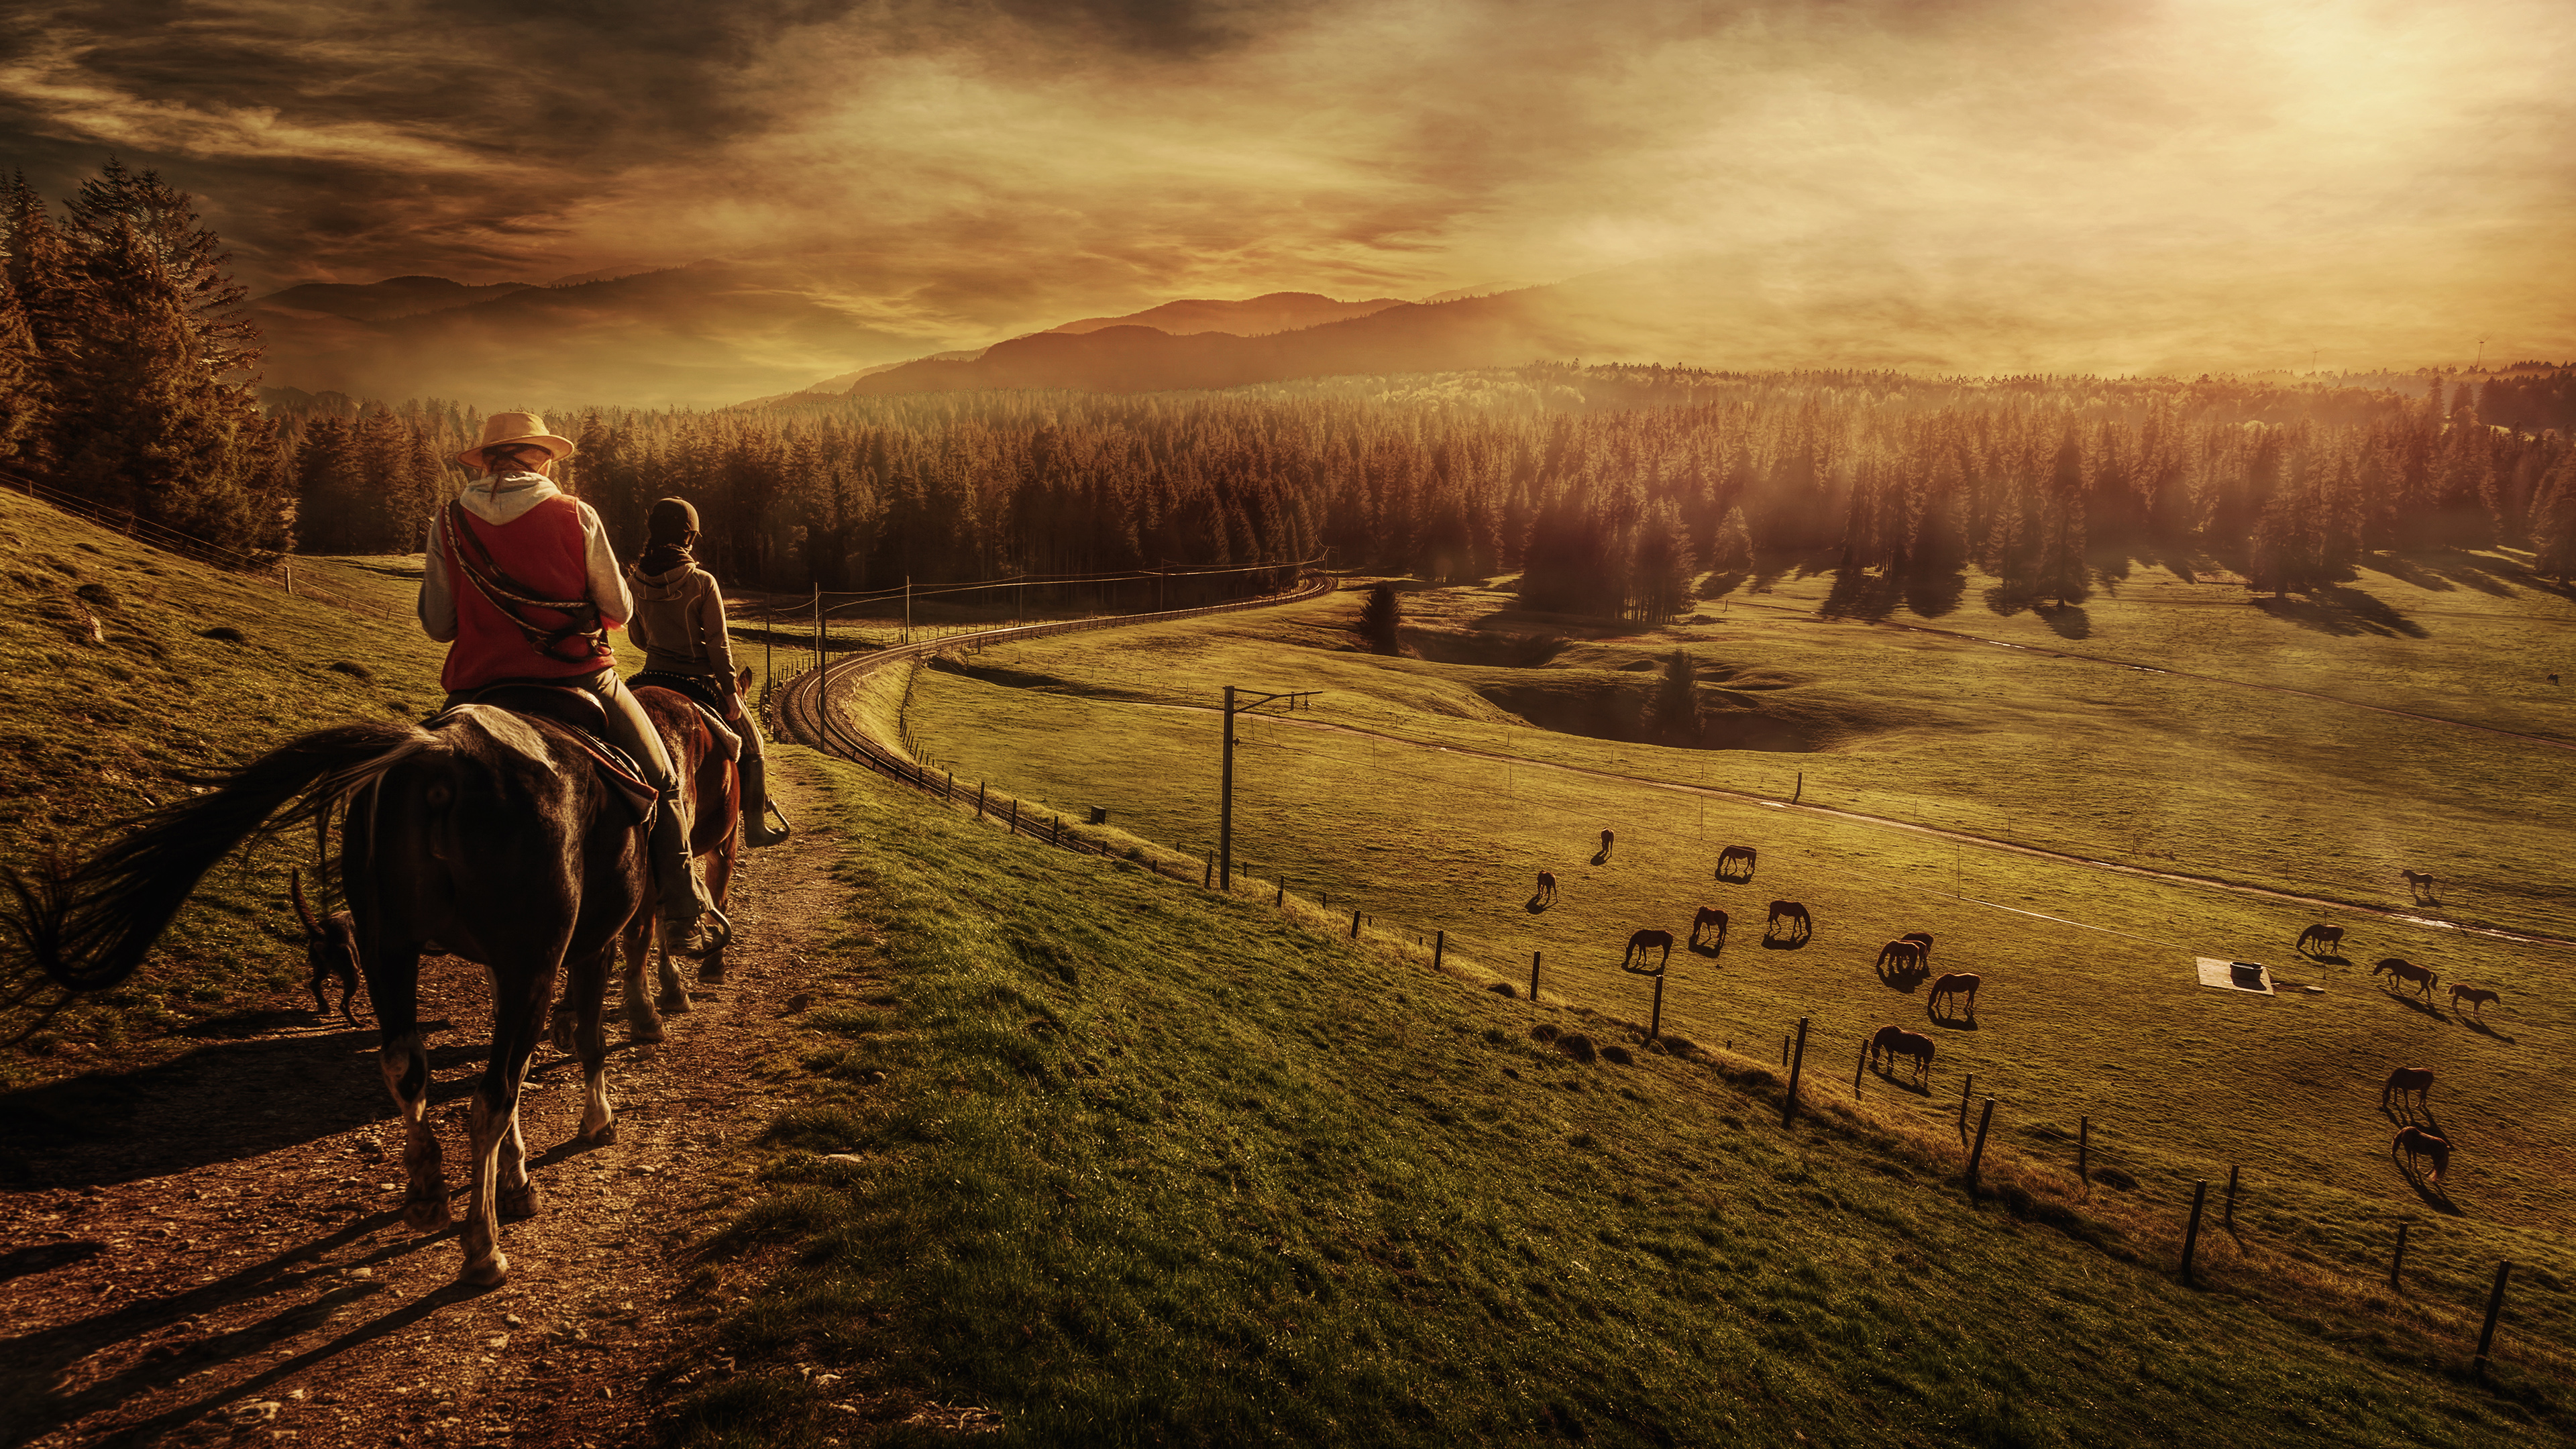 Free HD photography, landscape, people, horse, horse riding, sunset